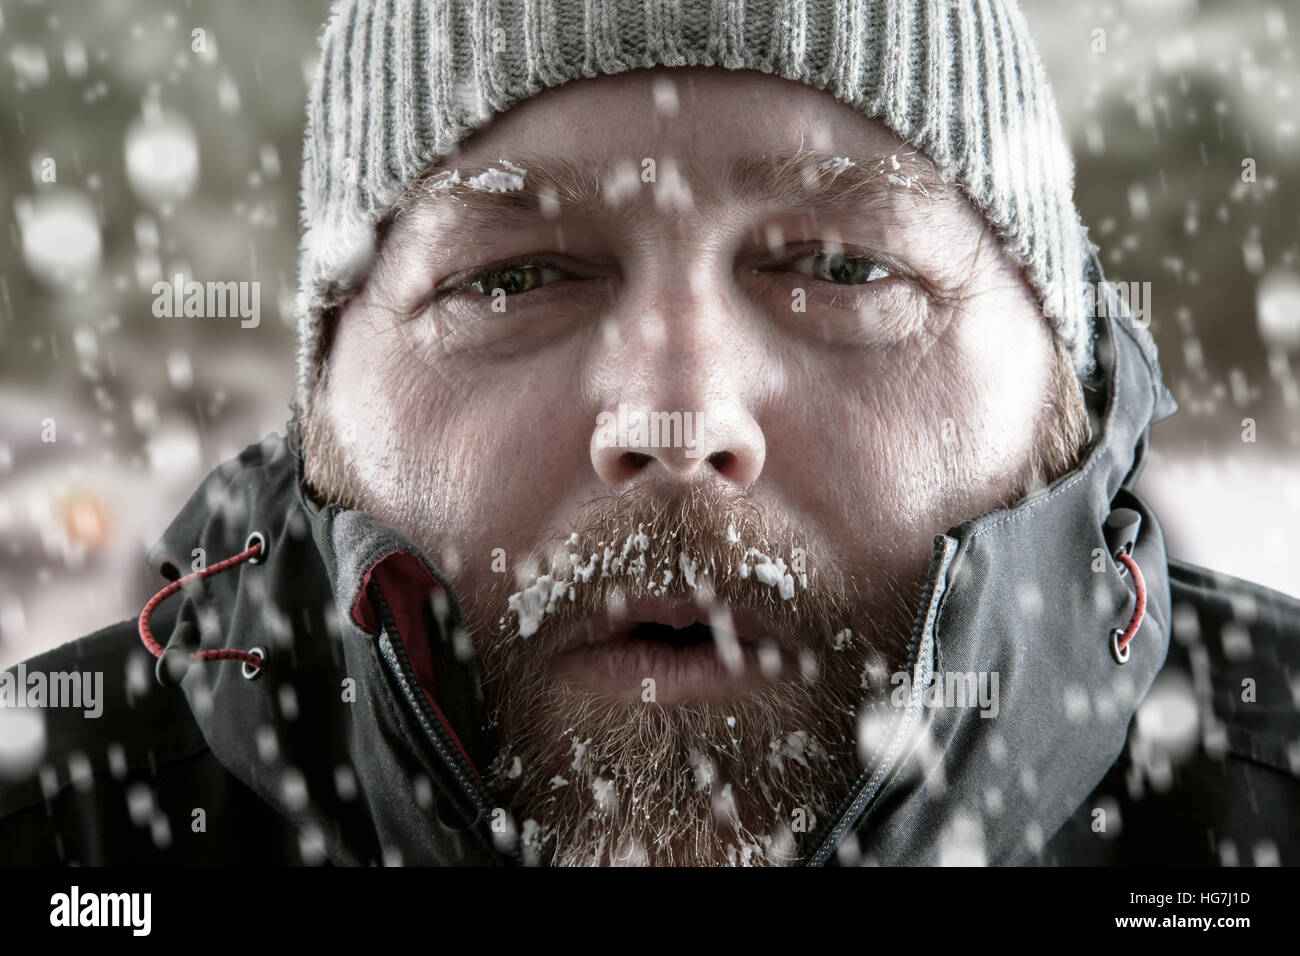 Freezing cold man portrait dressed for winter with slow falling and a snow scene background. Stock Photo